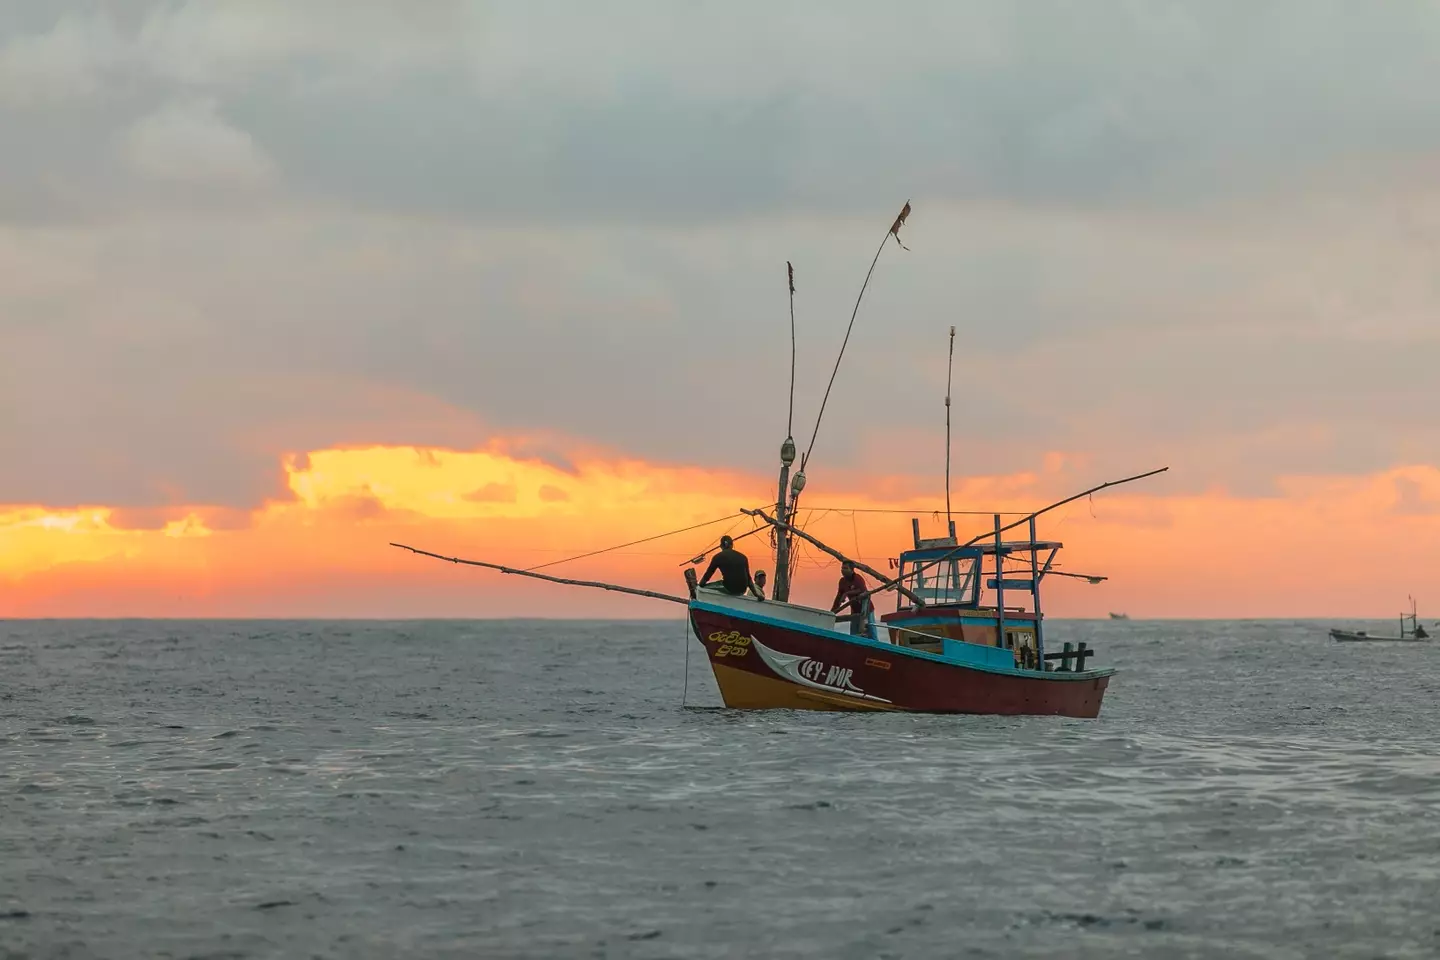 A local fisherman was arrested in connection to the disappearances.